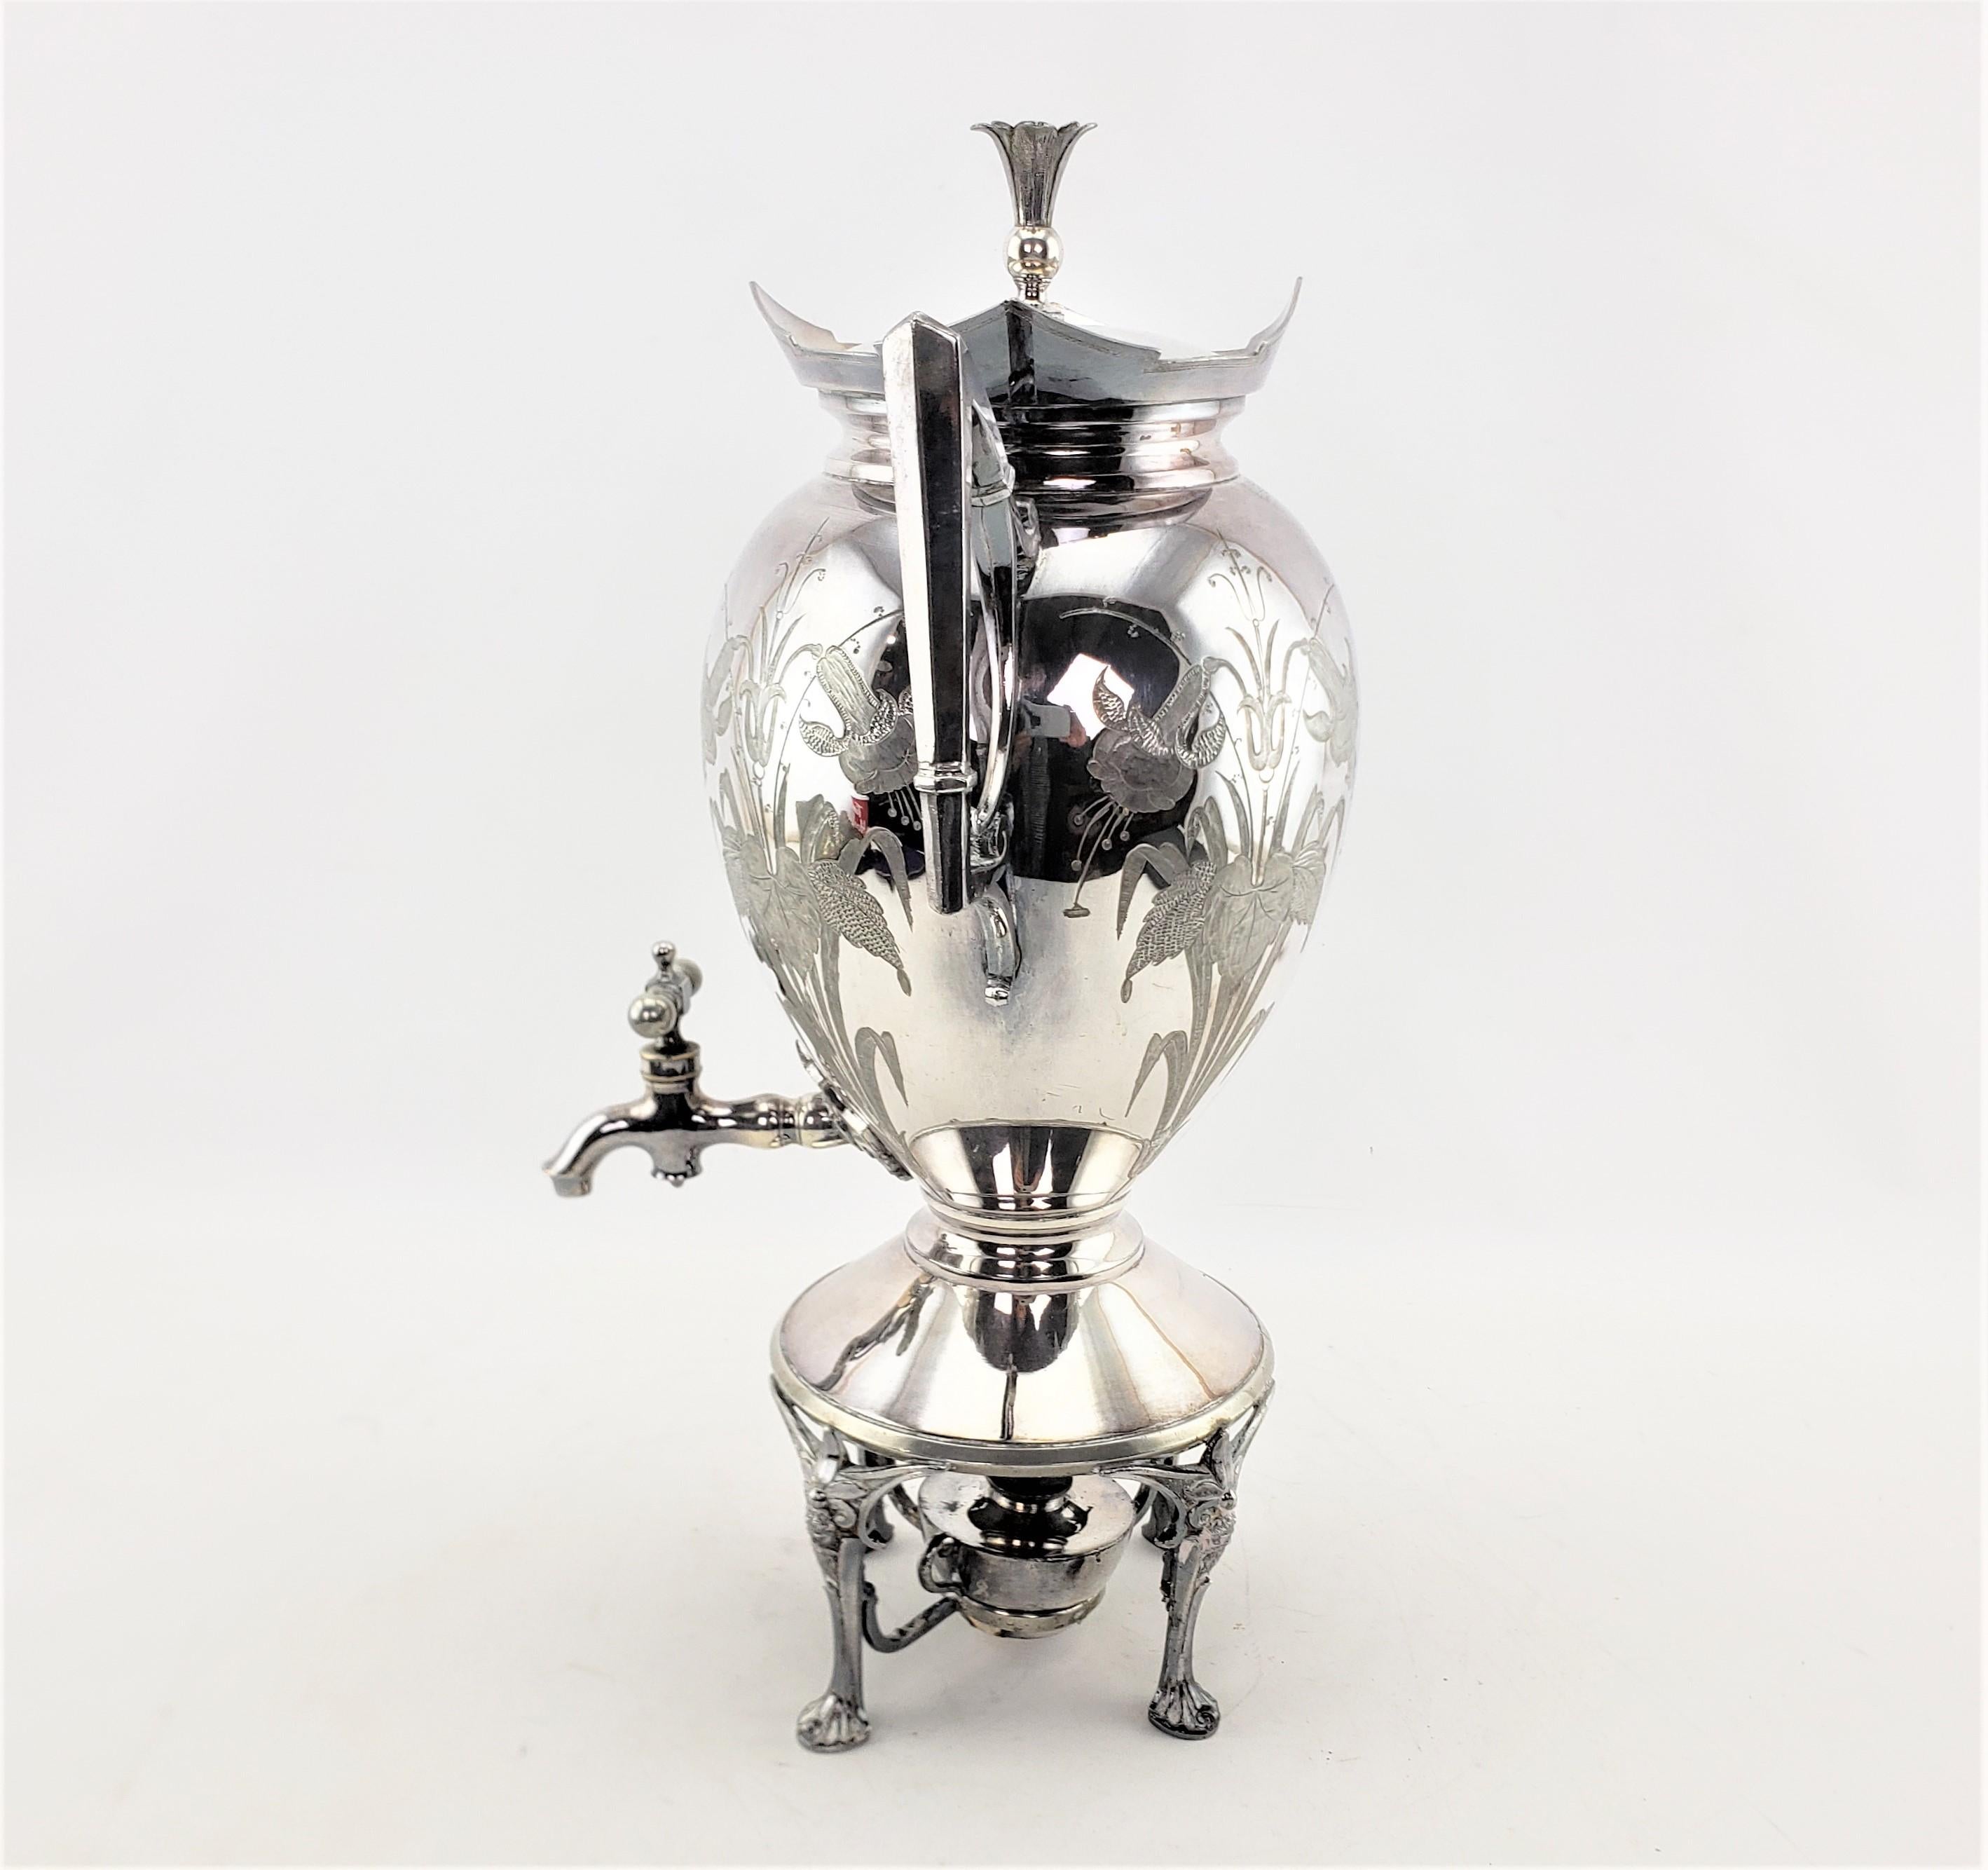 Machine-Made Antique Aesthetic Movement Silver Plated Hot Water Kettle with Floral Decoration For Sale